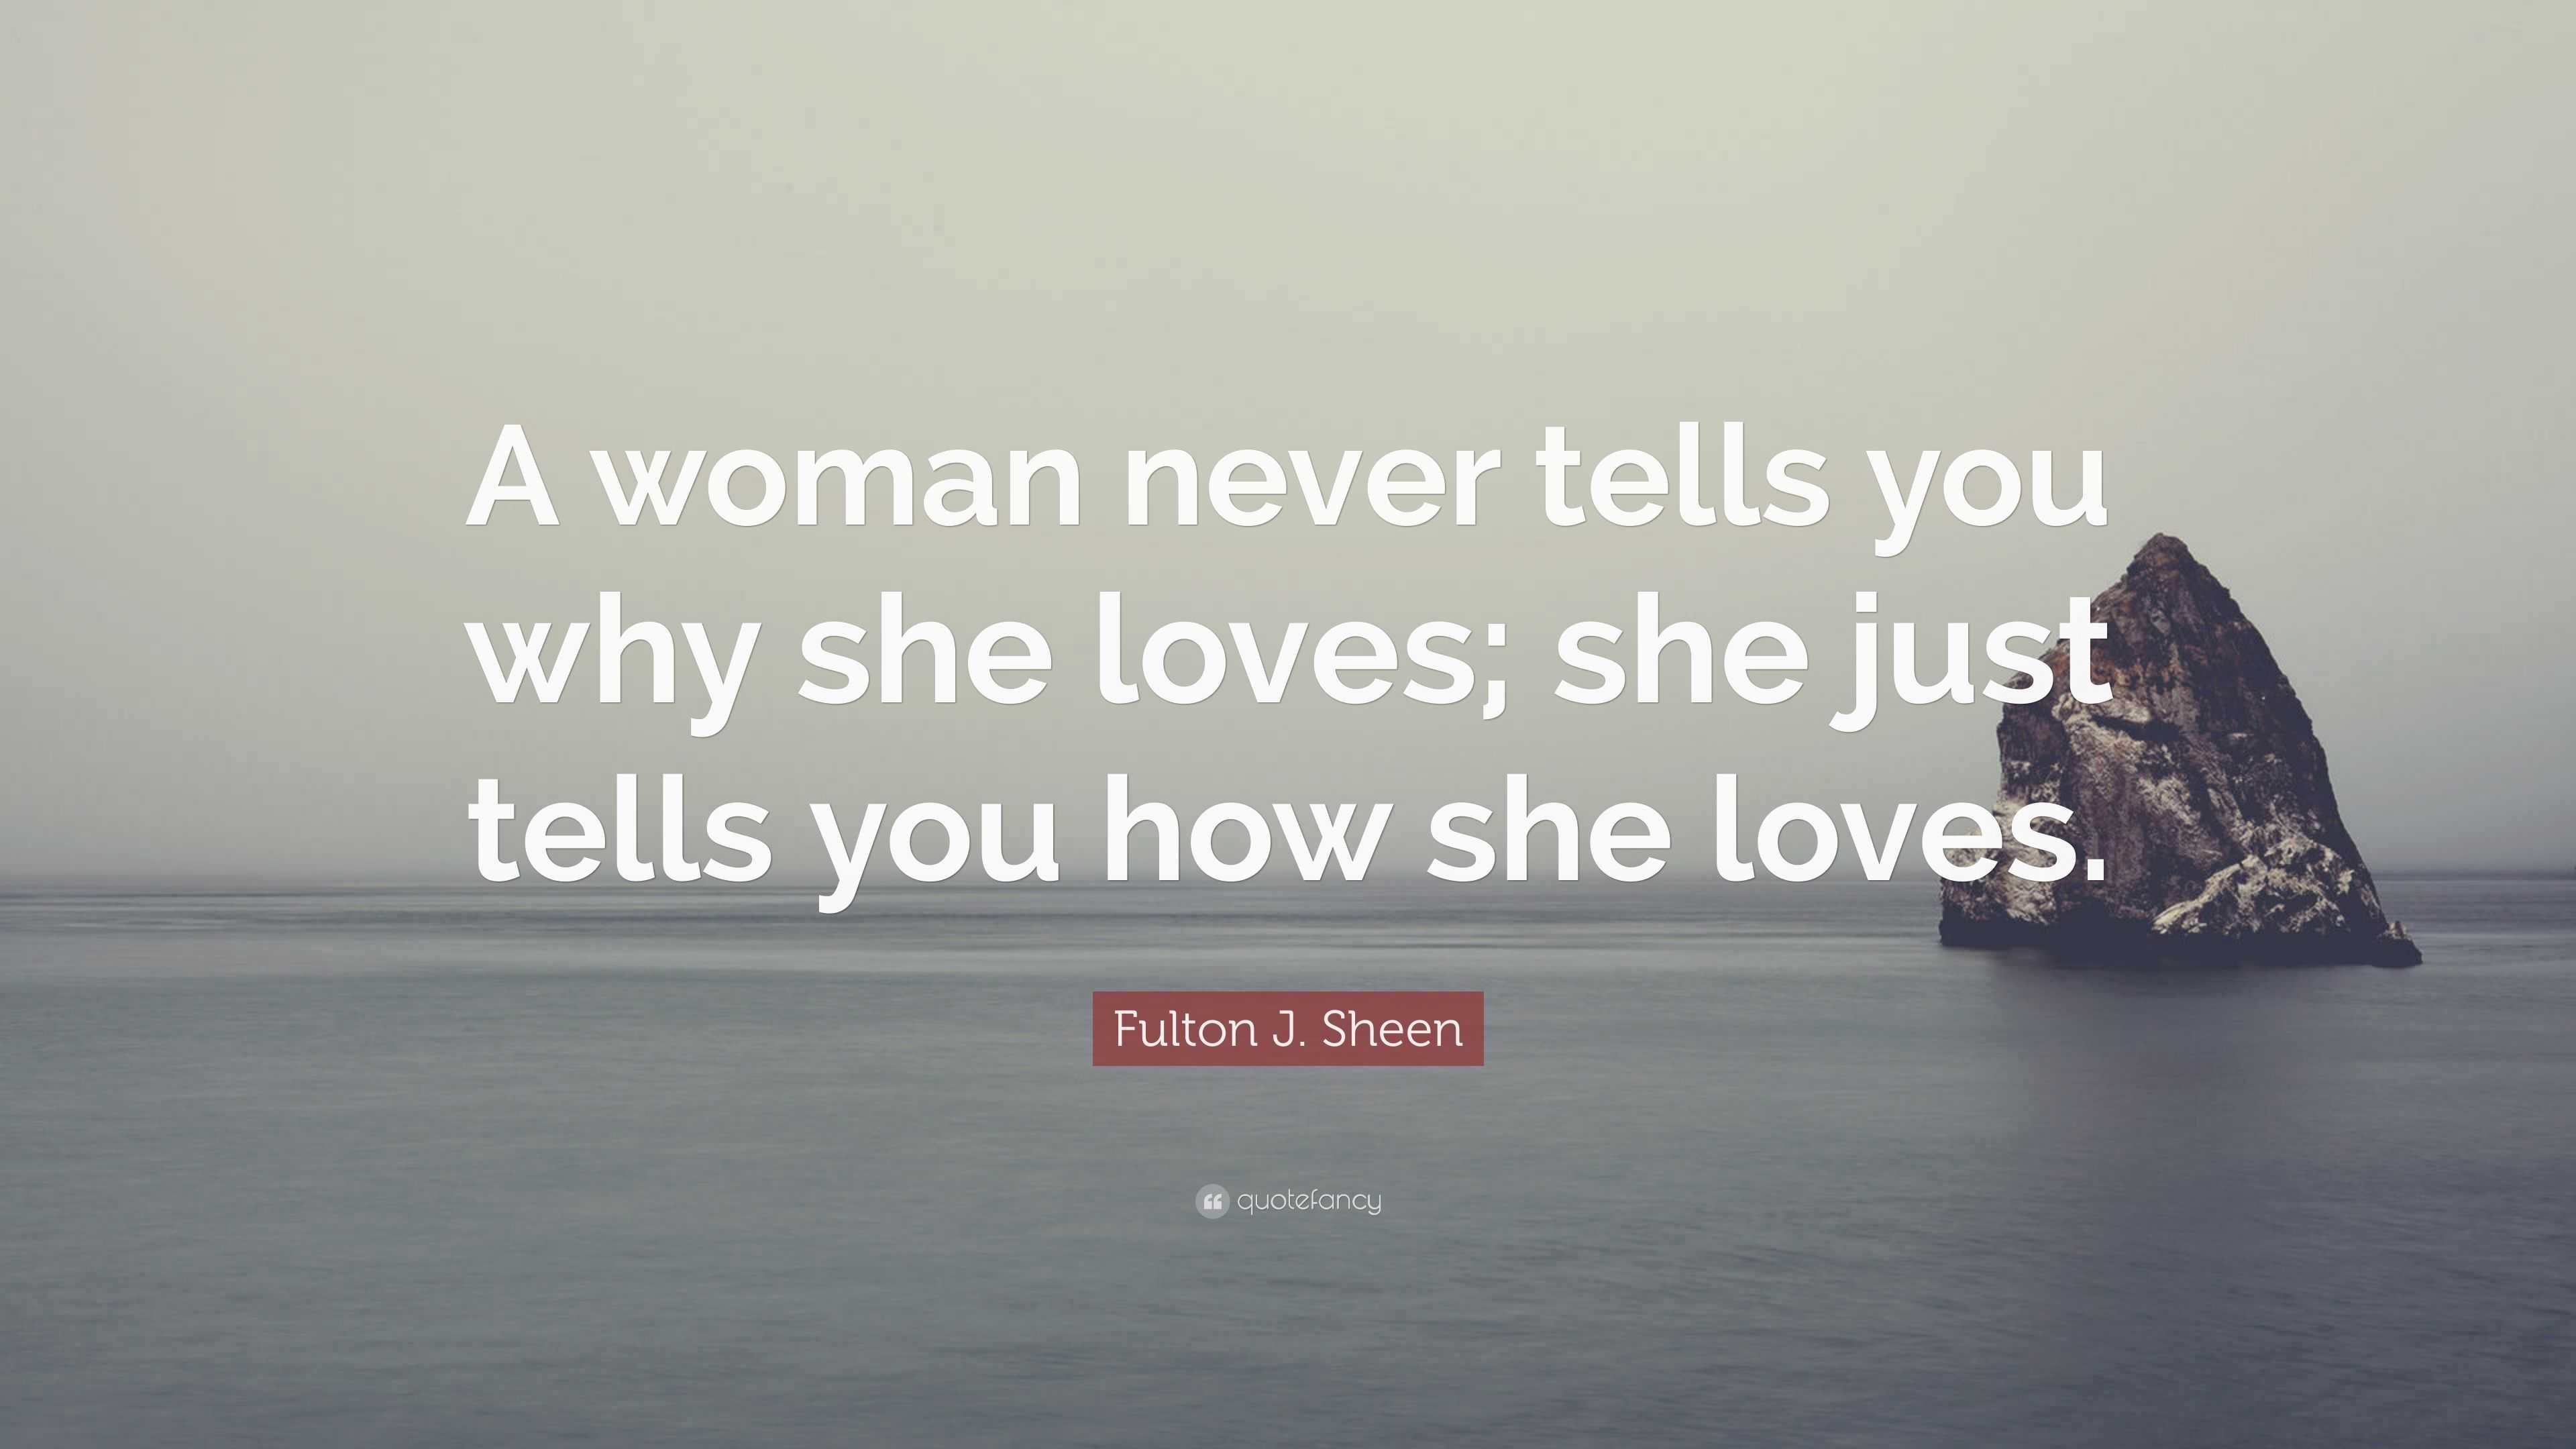 Fulton J. Sheen Quote: “A woman never tells you why she loves; she just ...